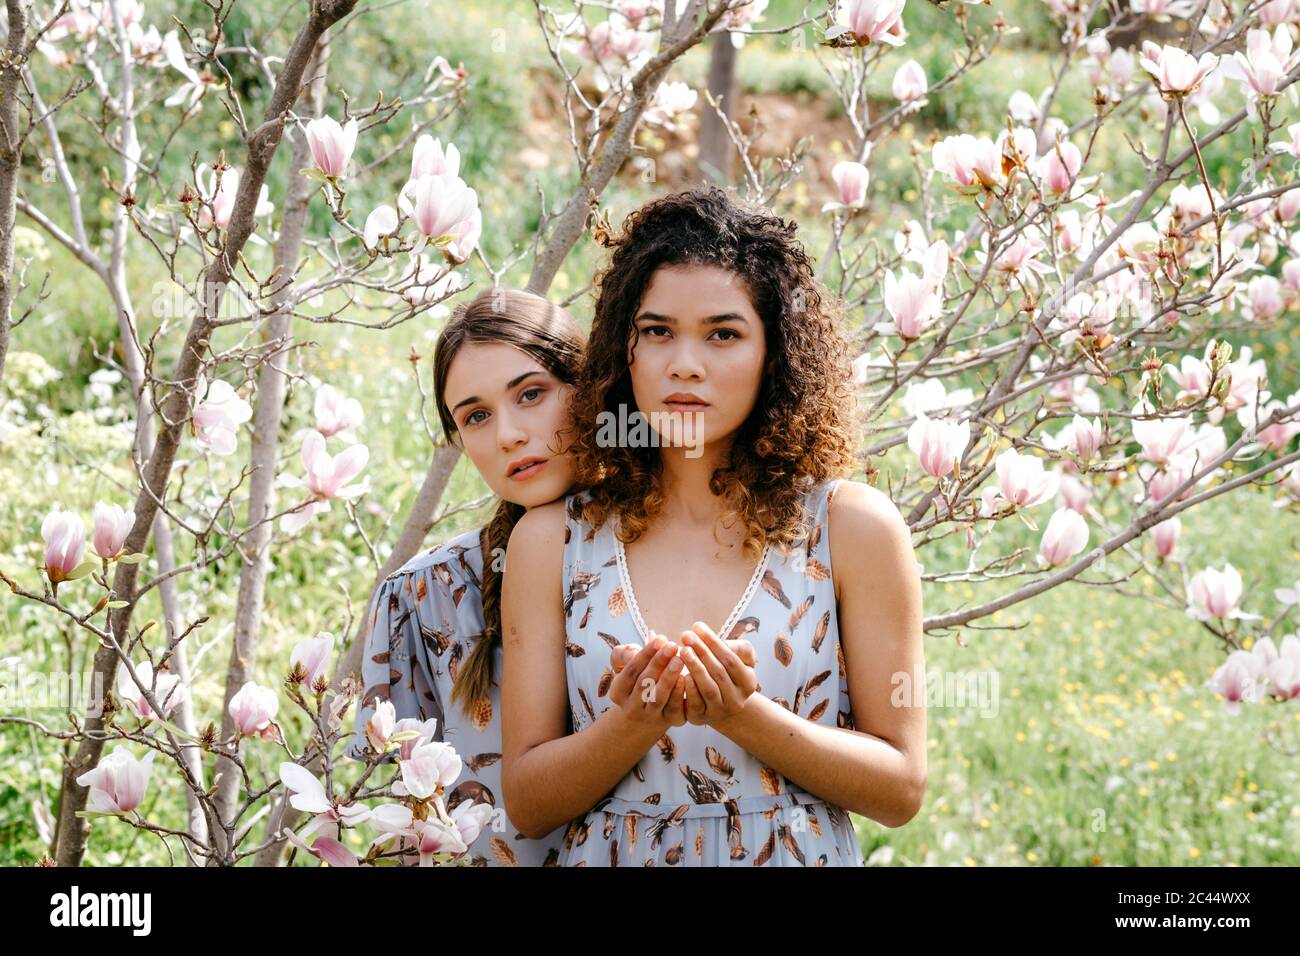 Loving sisters standing amidst flowers in park during springtime Stock Photo